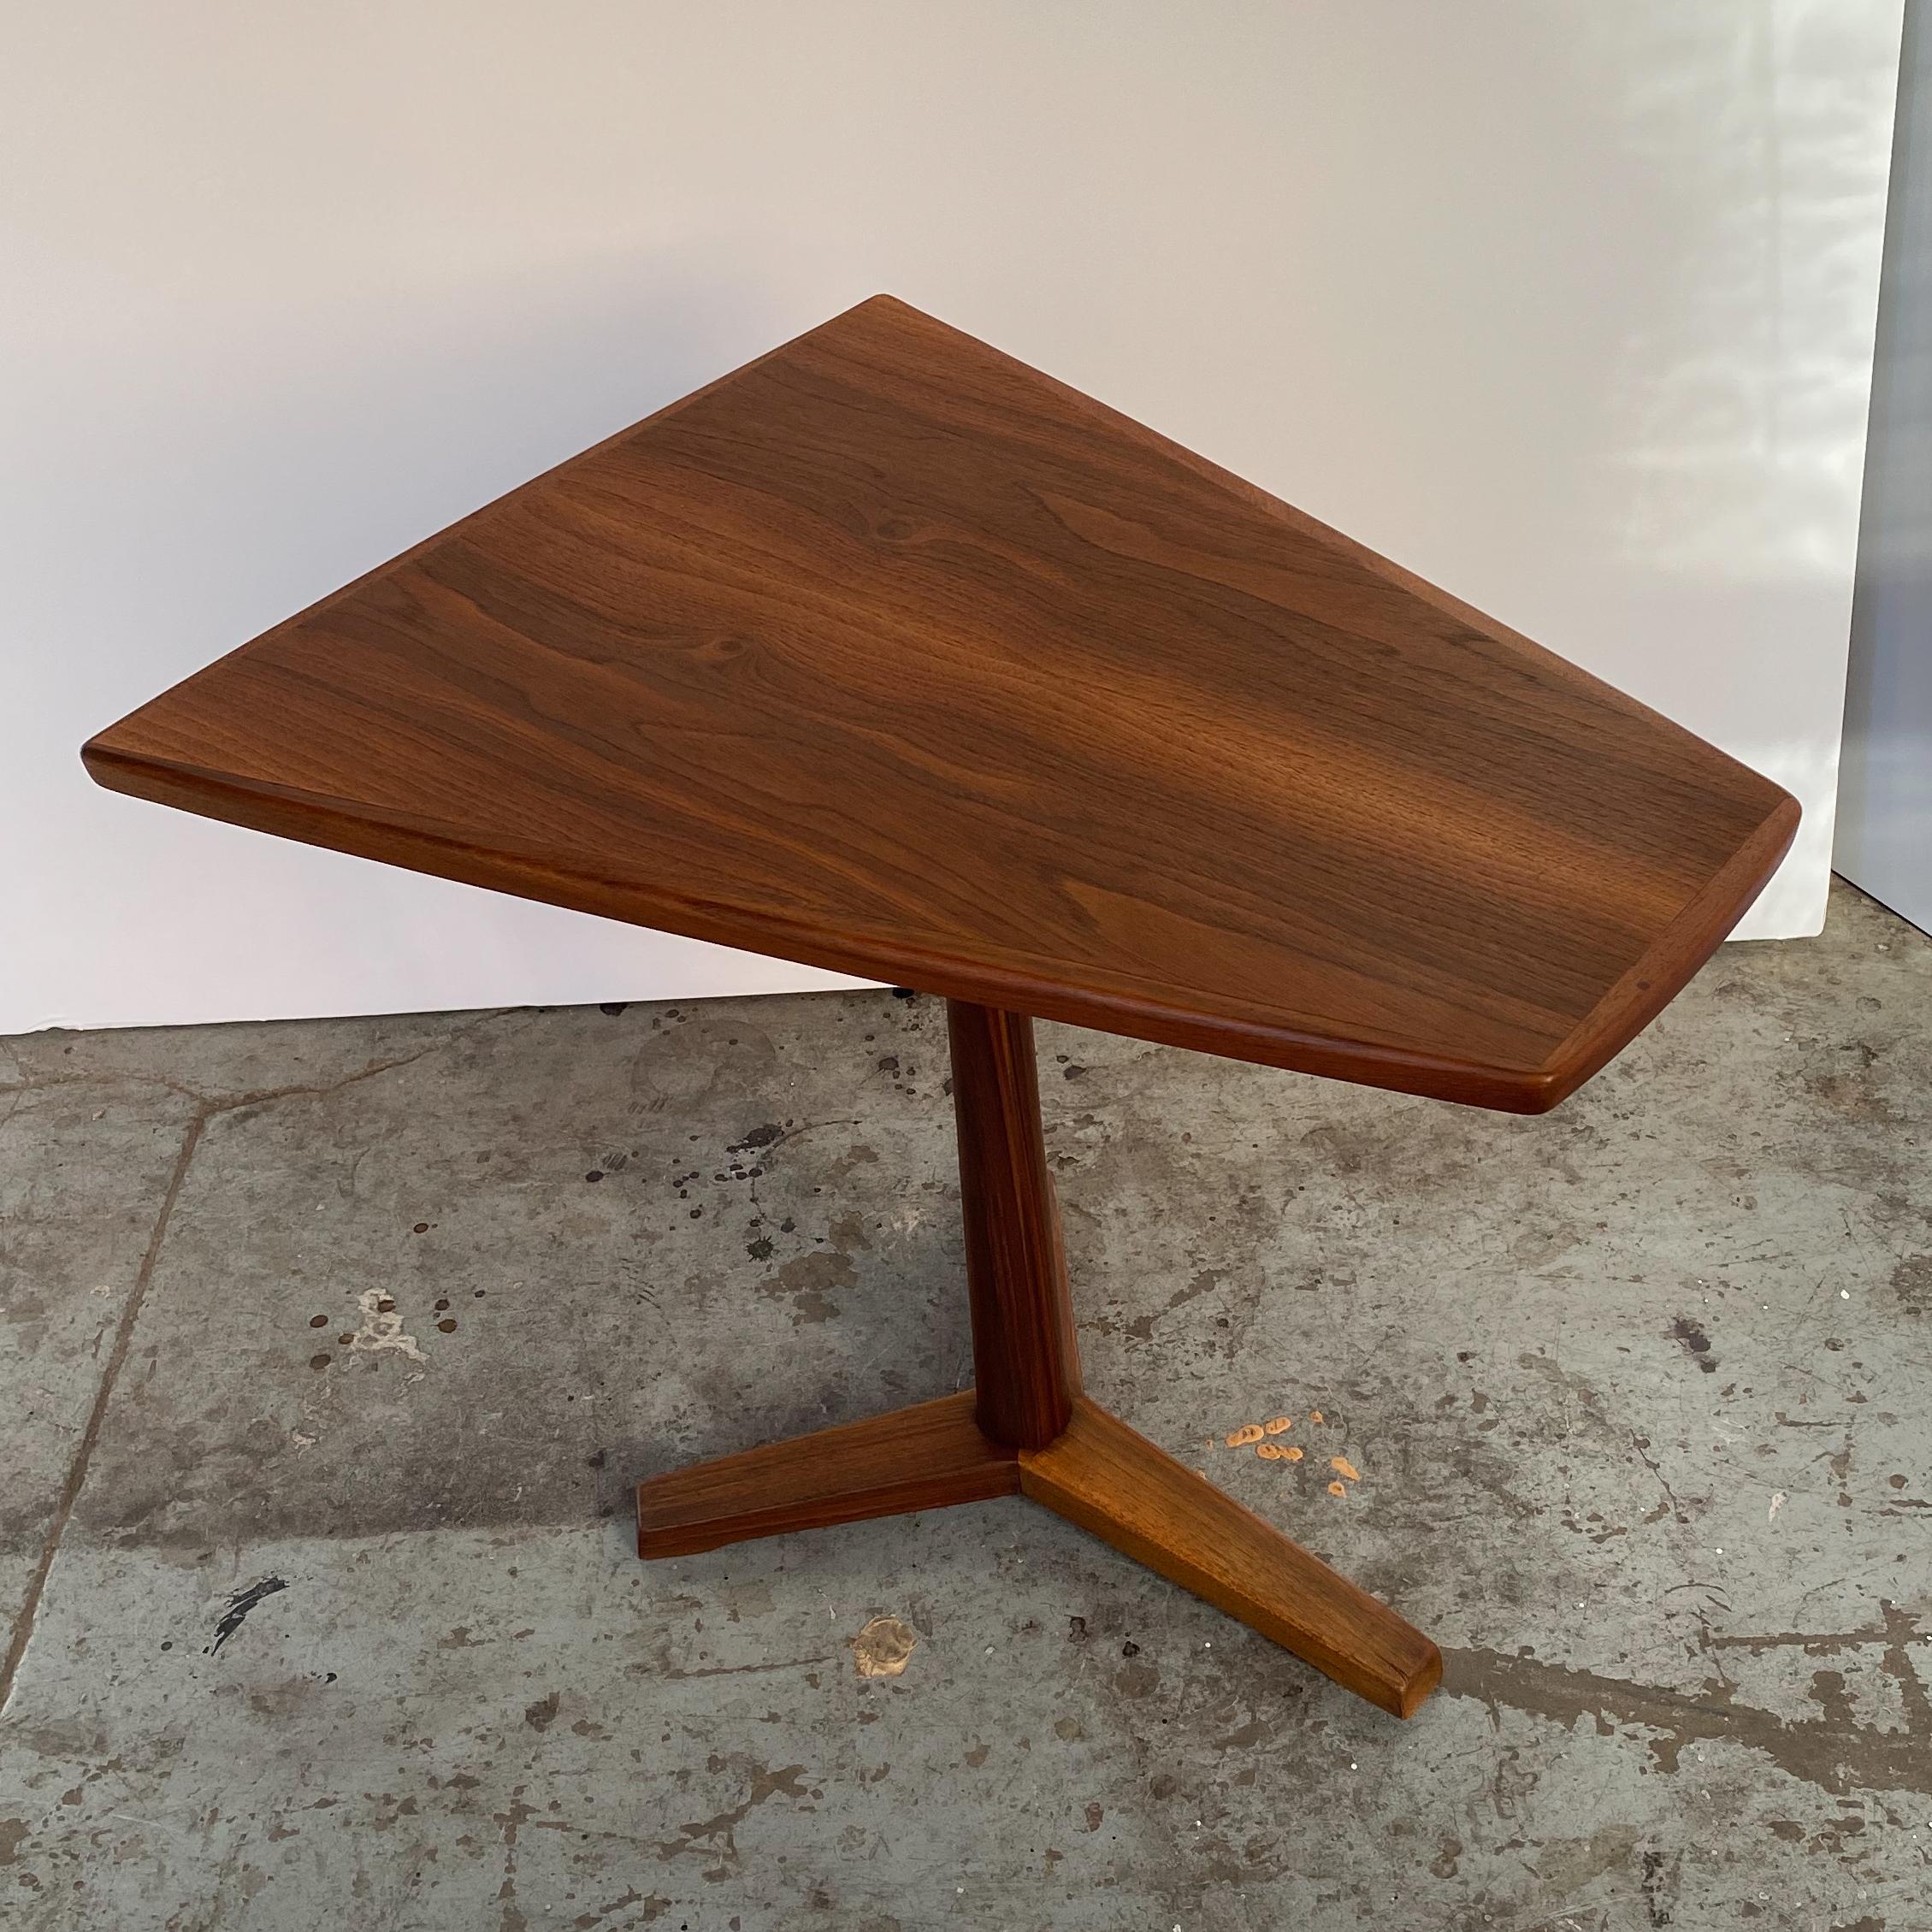 Trapezoidal accent table with beautifully figured sap-streaked walnut top, tripod teak foot configuration and birch secondary wood underneath. Made in Denmark for DUX, Sweden, 1960s. The table has been cleaned and polished but retains its original